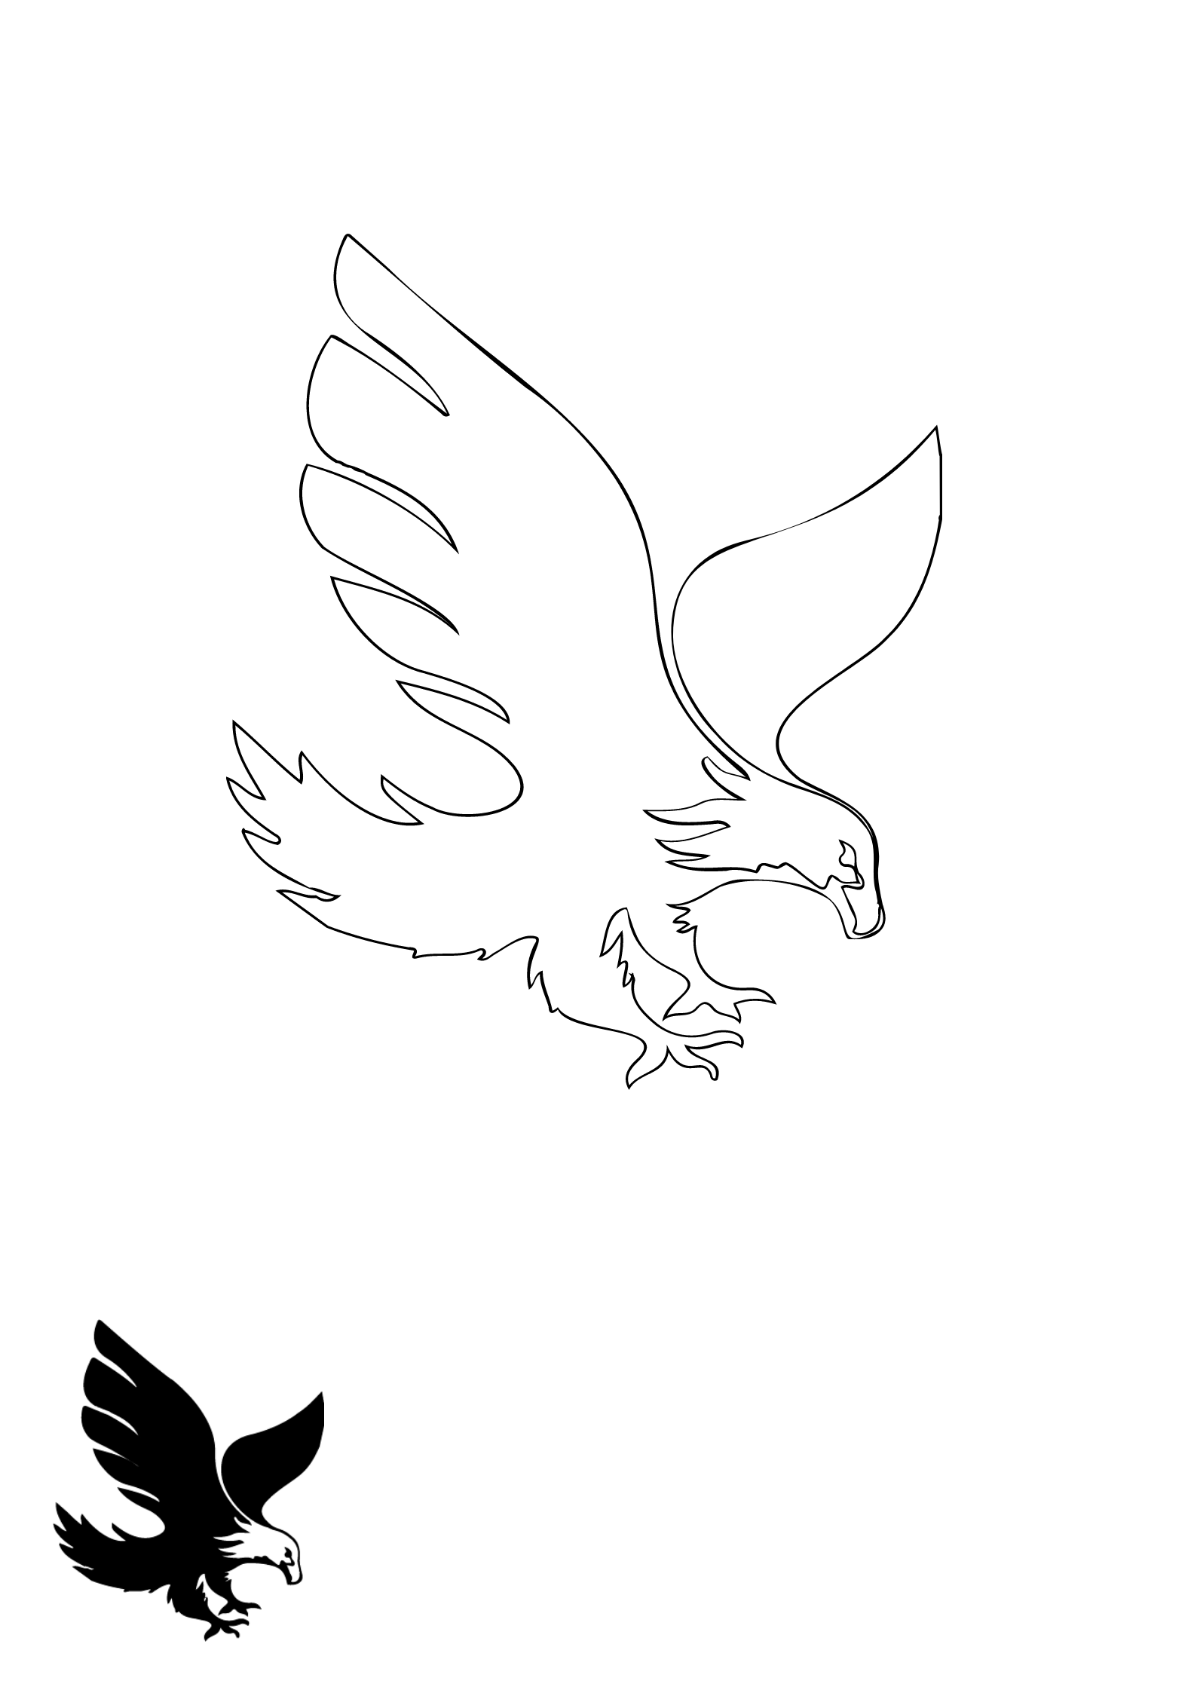 Black Eagle coloring page Template